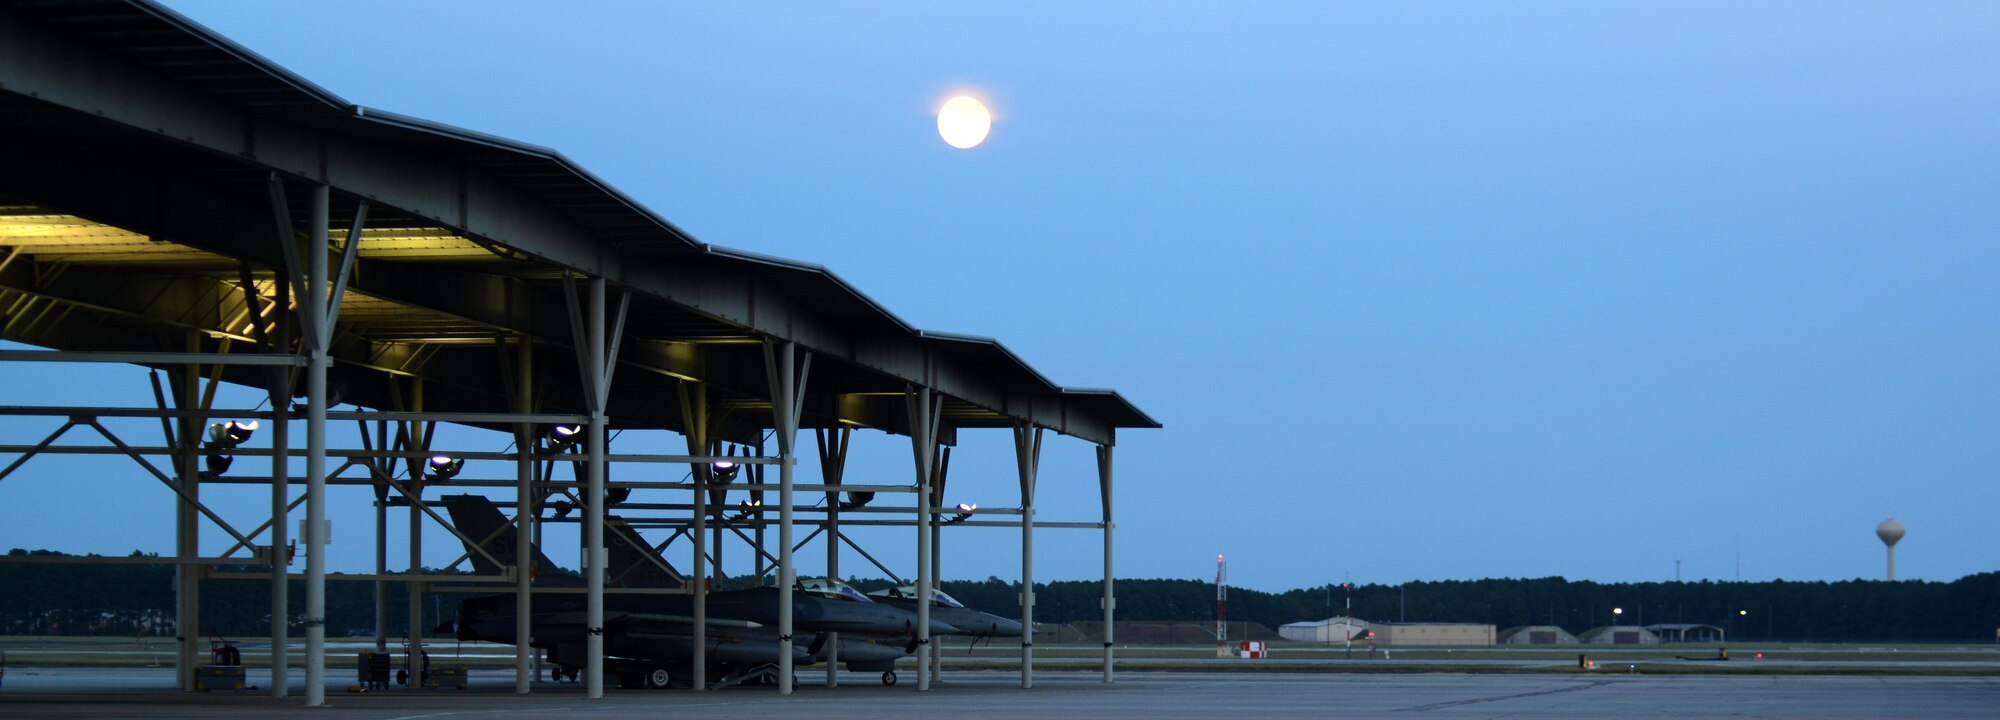 The moon shines over the flightline at Shaw Air Force Base, S.C., Aug. 17, 2016. Airmen assigned to the 20th Maintenance Group work all hours of the day to ensure Shaw’s 79 F-16CM Fighting Falcons are ready to deploy any time. (U.S. Air Force photo by Airman 1st Class Kelsey Tucker)